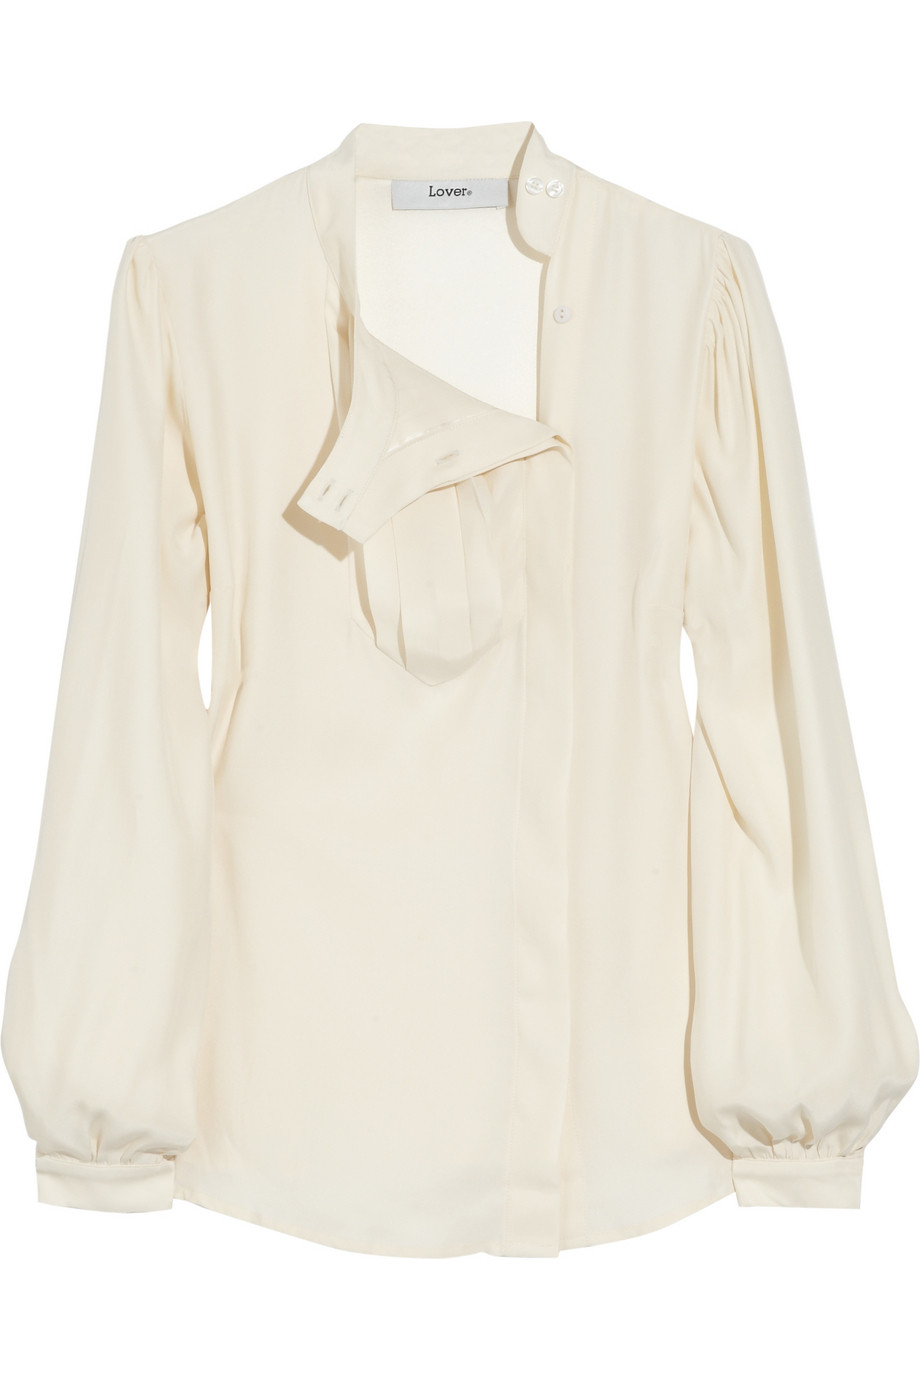 Lover Ivory Silk Blouse in White (ivory) | Lyst